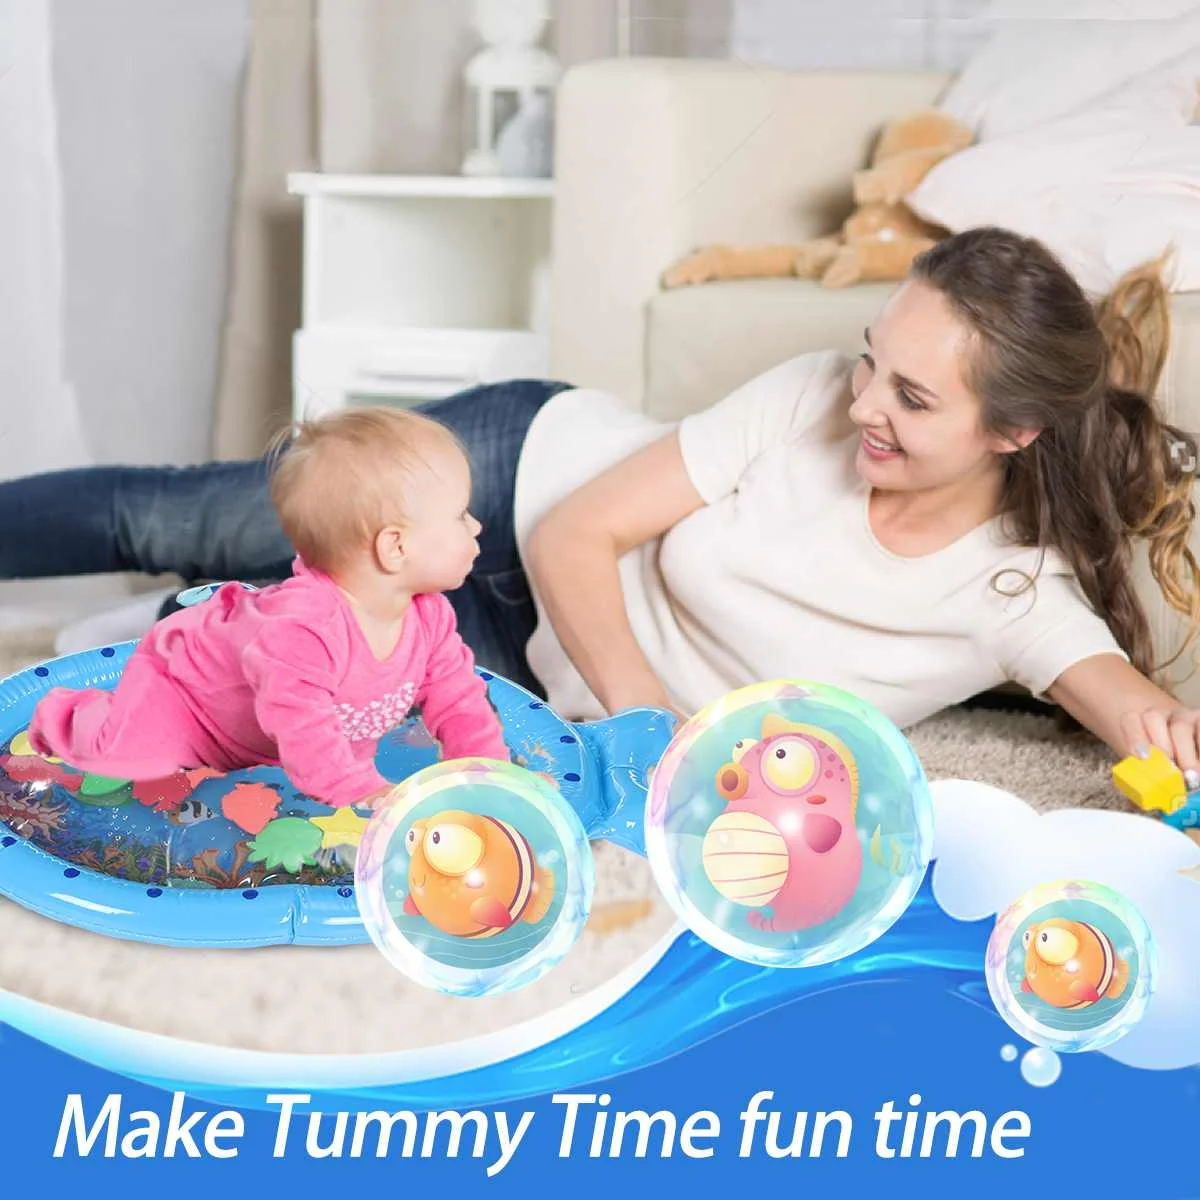 

Inflatable Water Mats Baby Stimulation Growth Early Development Fun Play Toys Activity Center, for 3 6 9 Months Toddlers Infants